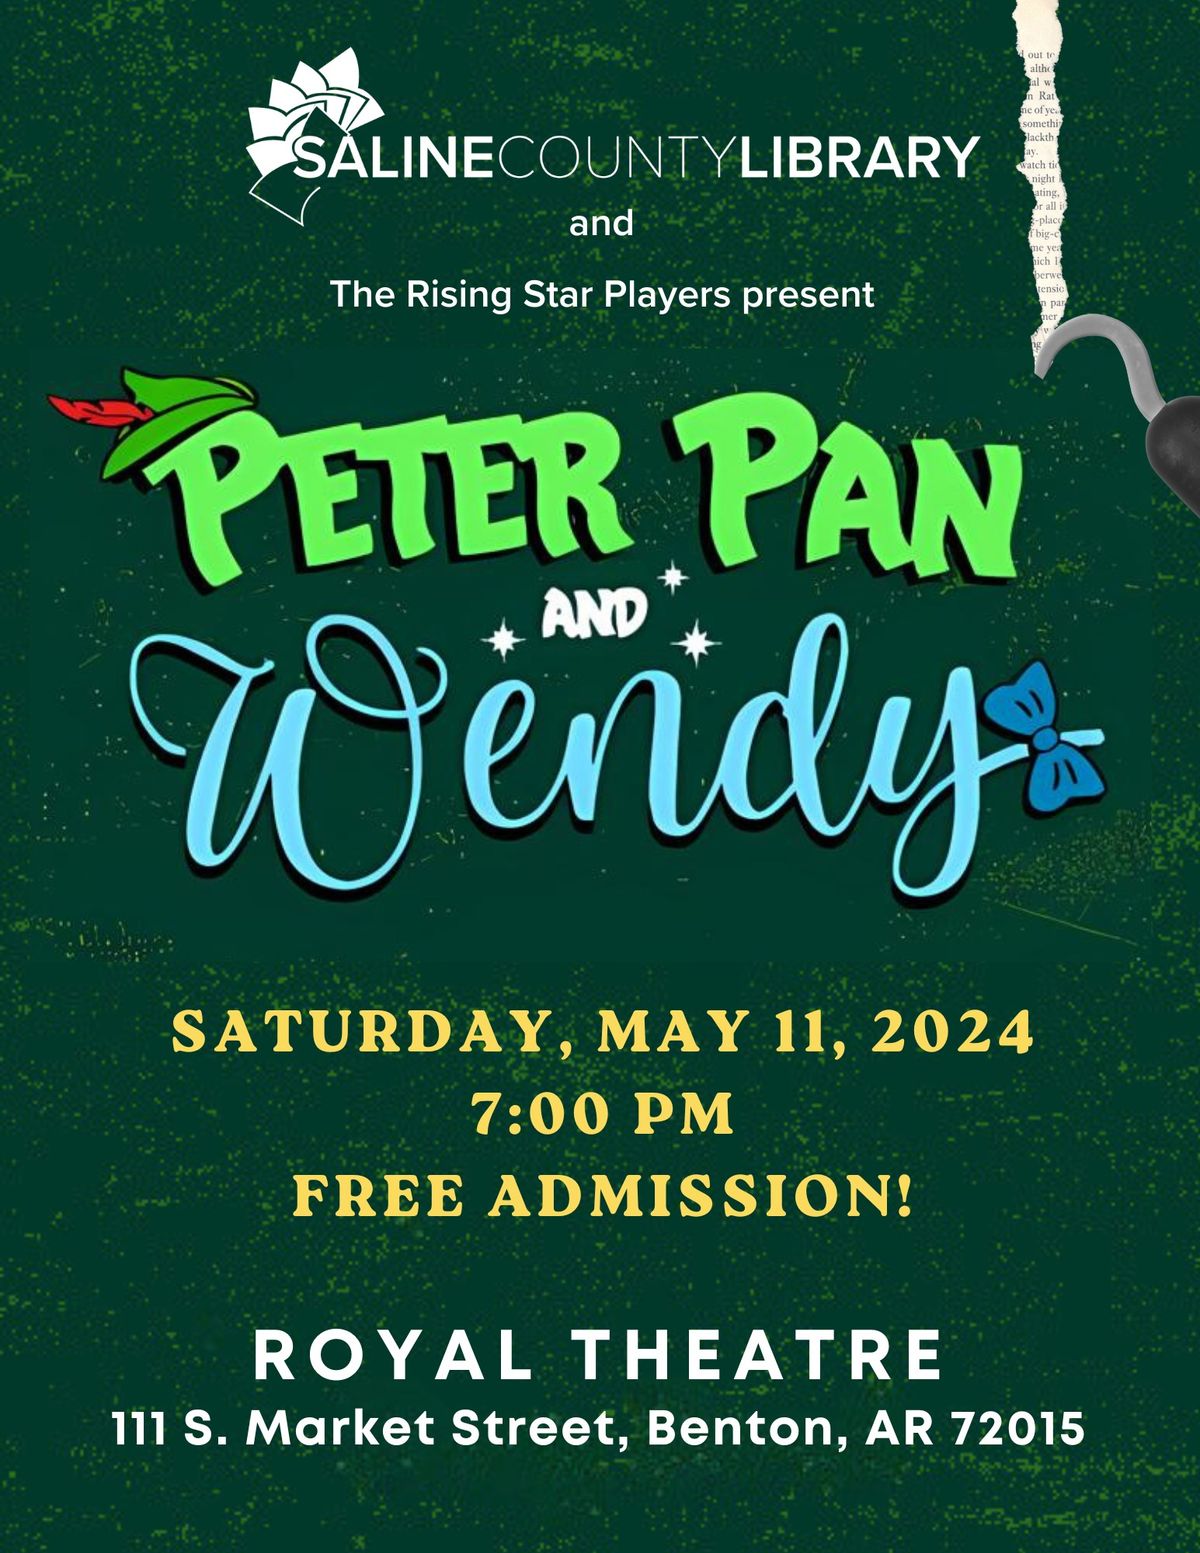 The Rising Star Players Present Peter Pan and Wendy